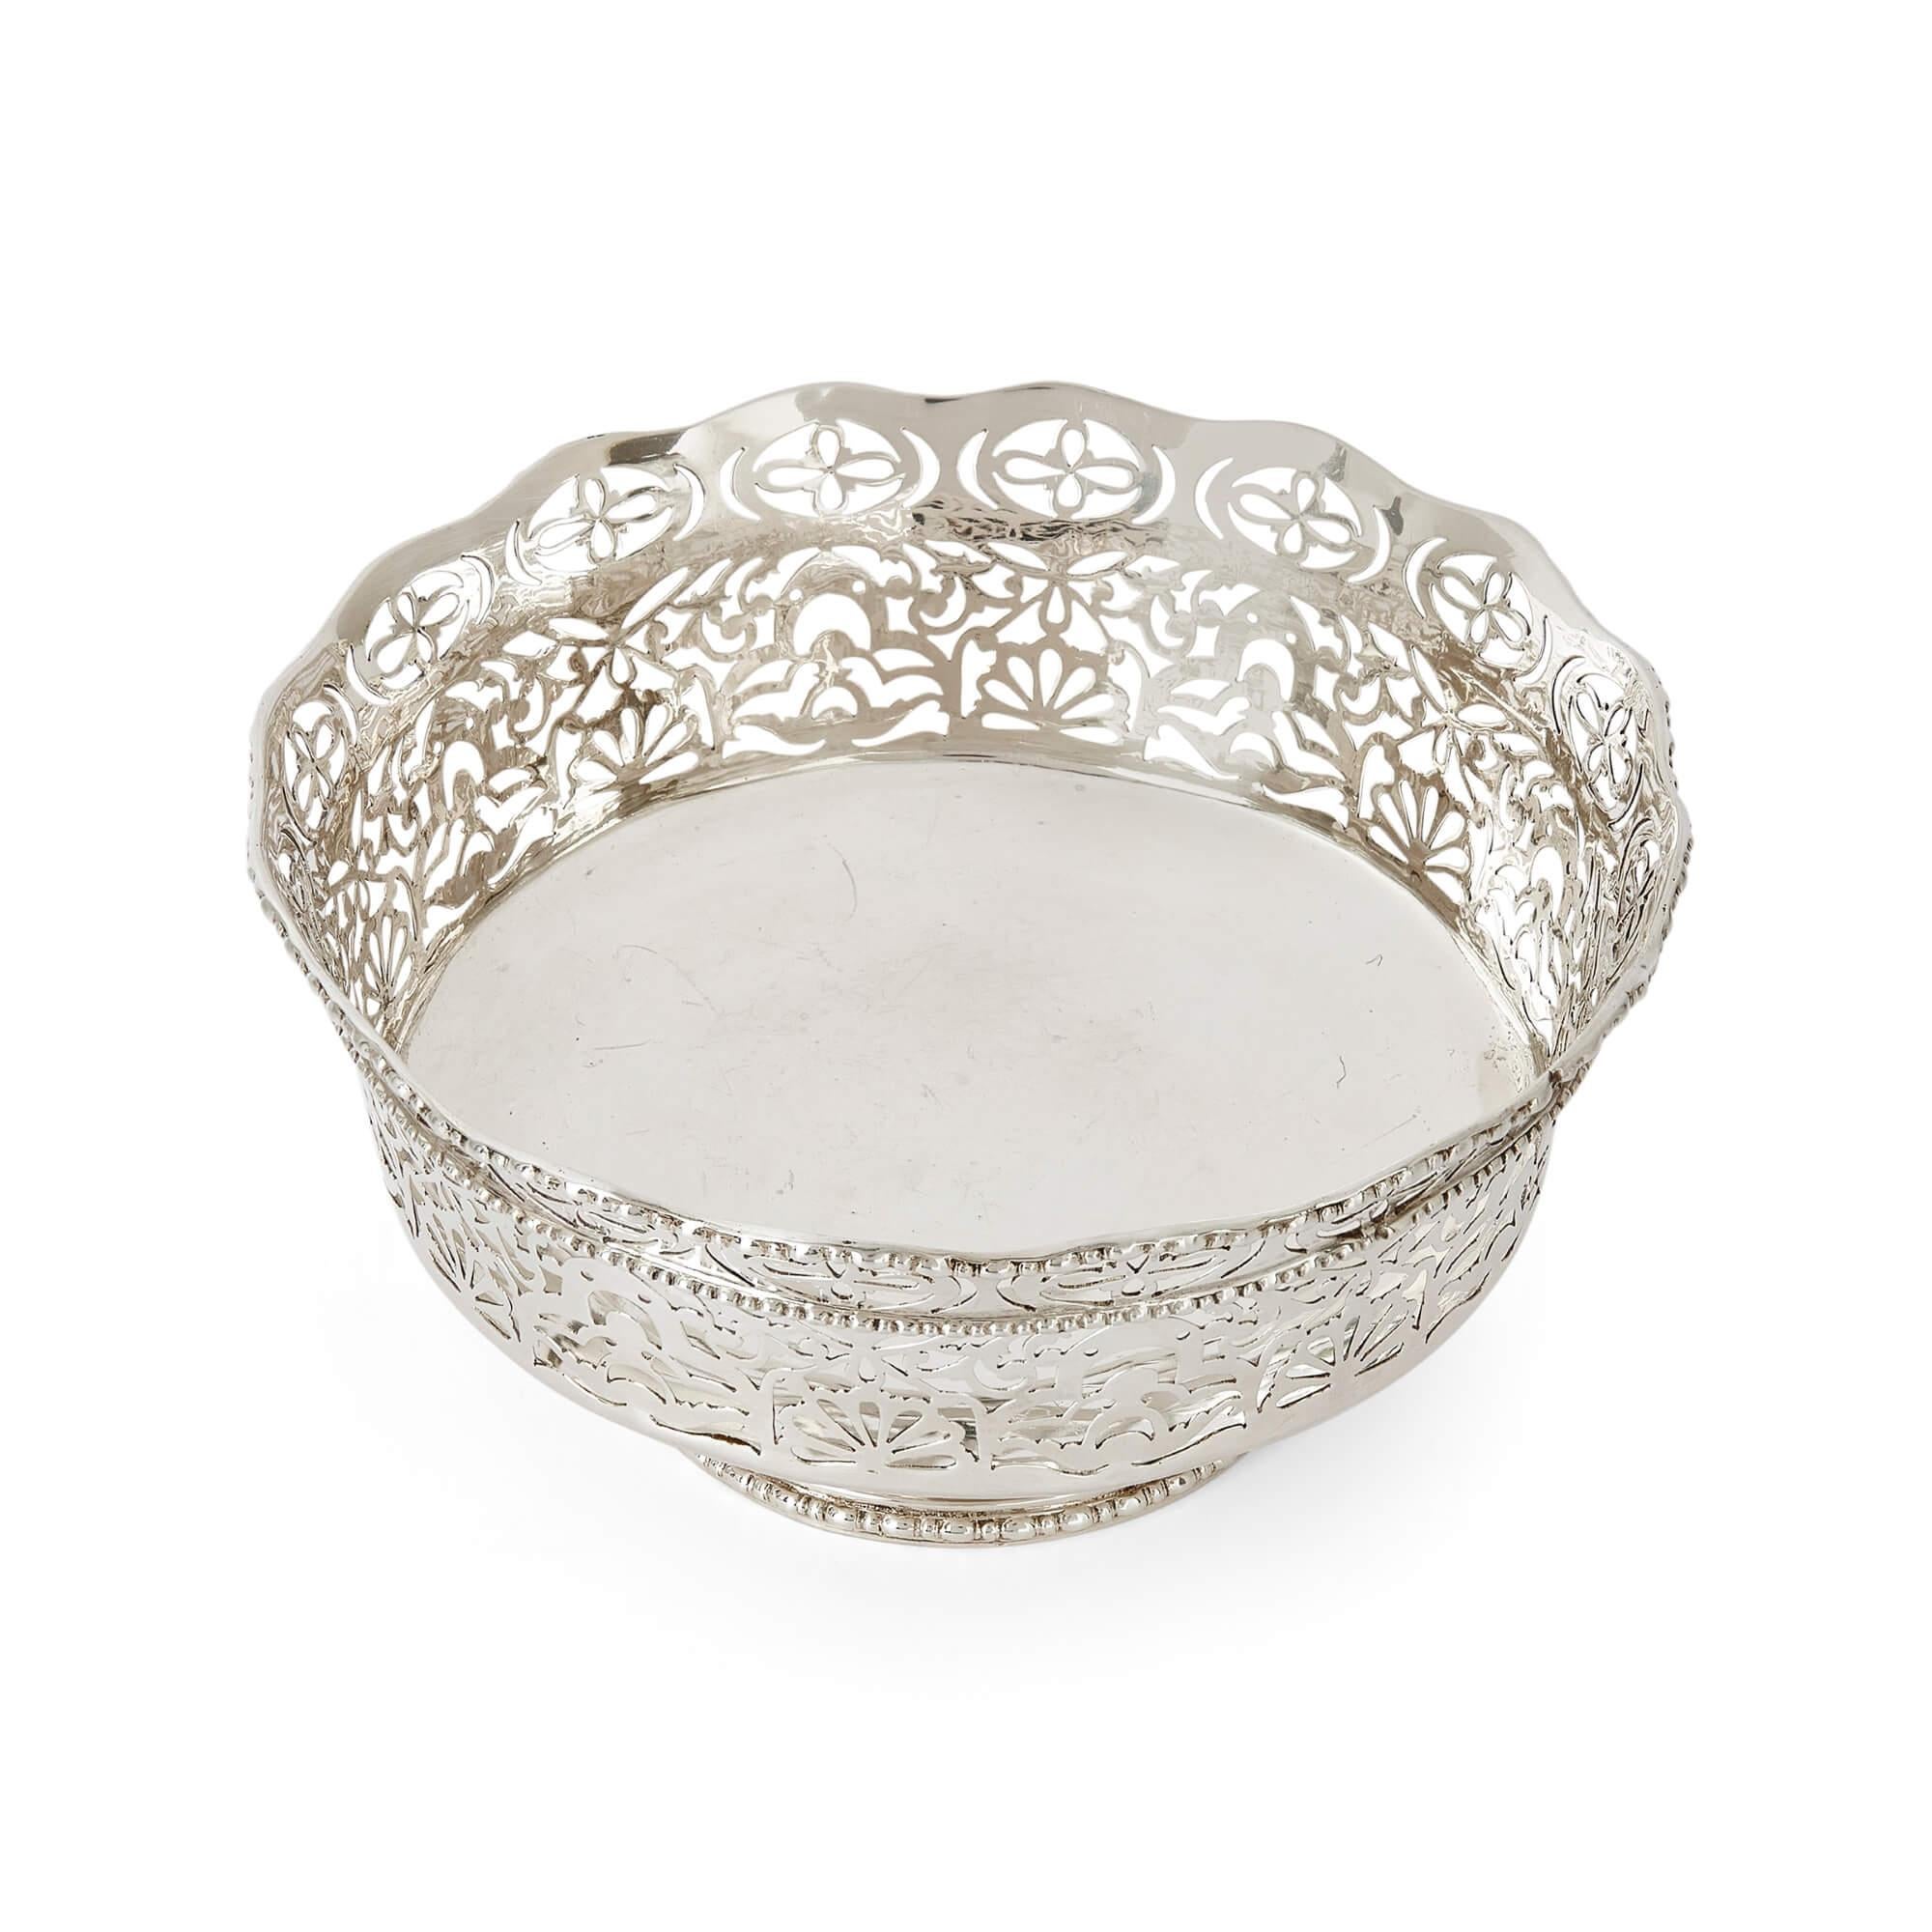 George V openwork round silver bowl 
English, 1931
Height 8cm, diameter 16cm

Crafted by the Chester-based firm of Solomon Blanckensee & Son in 1931, this silver bowl exhibits the elegance and style that was characteristic of silver making in the